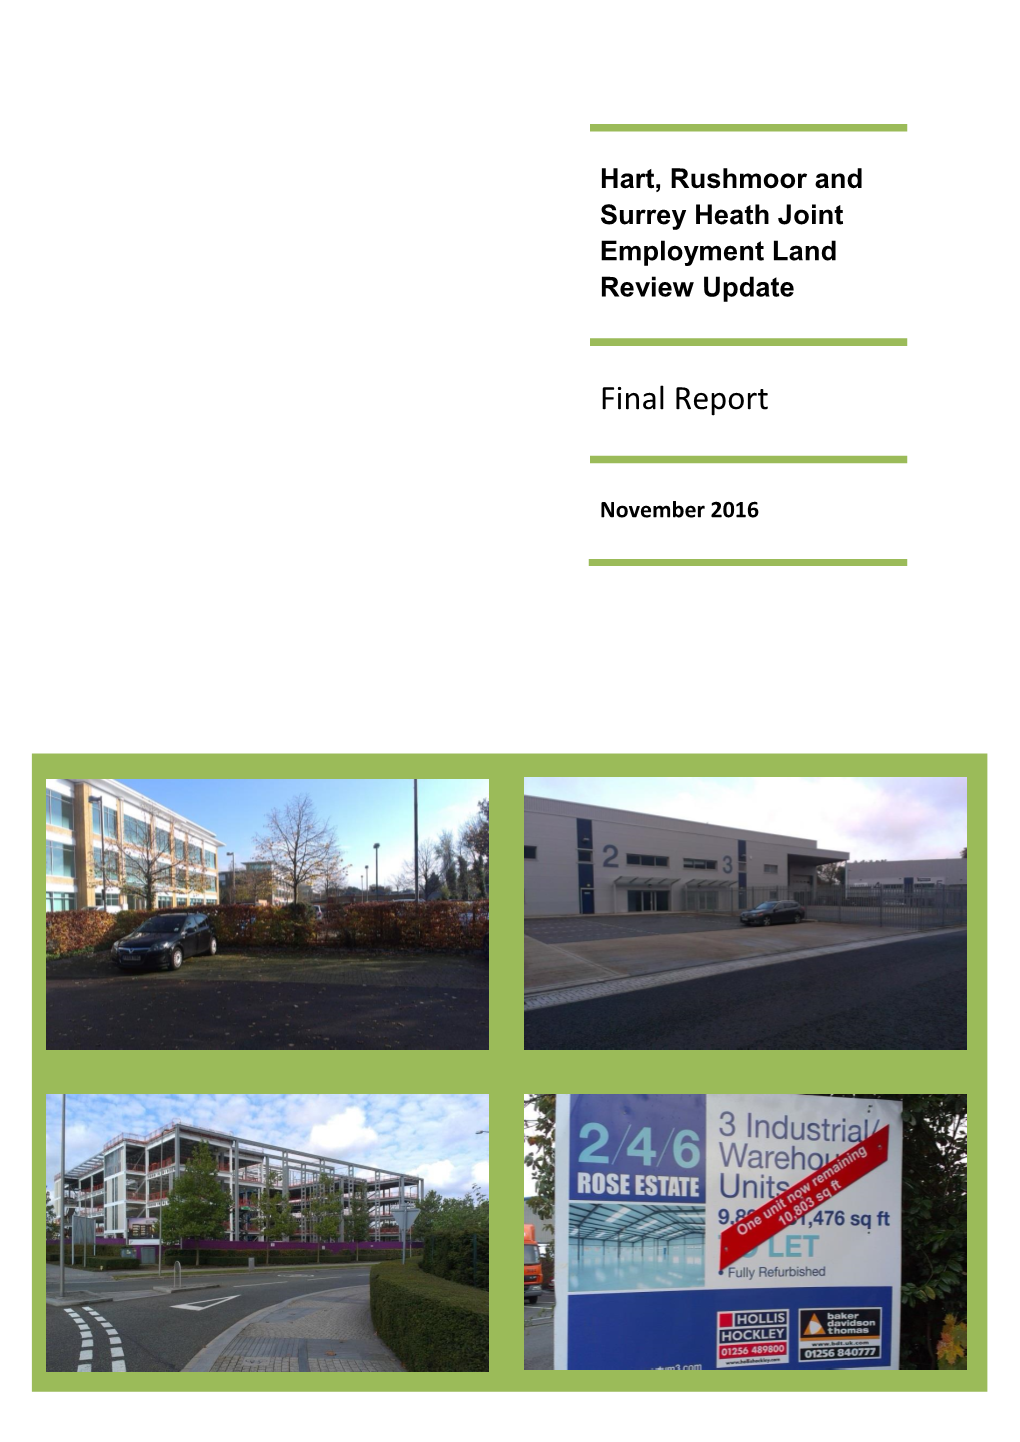 Hart, Rushmoor, Surrey Heath Employment Land Review (ELR), the Three Authorities Make the Following Disclaimer